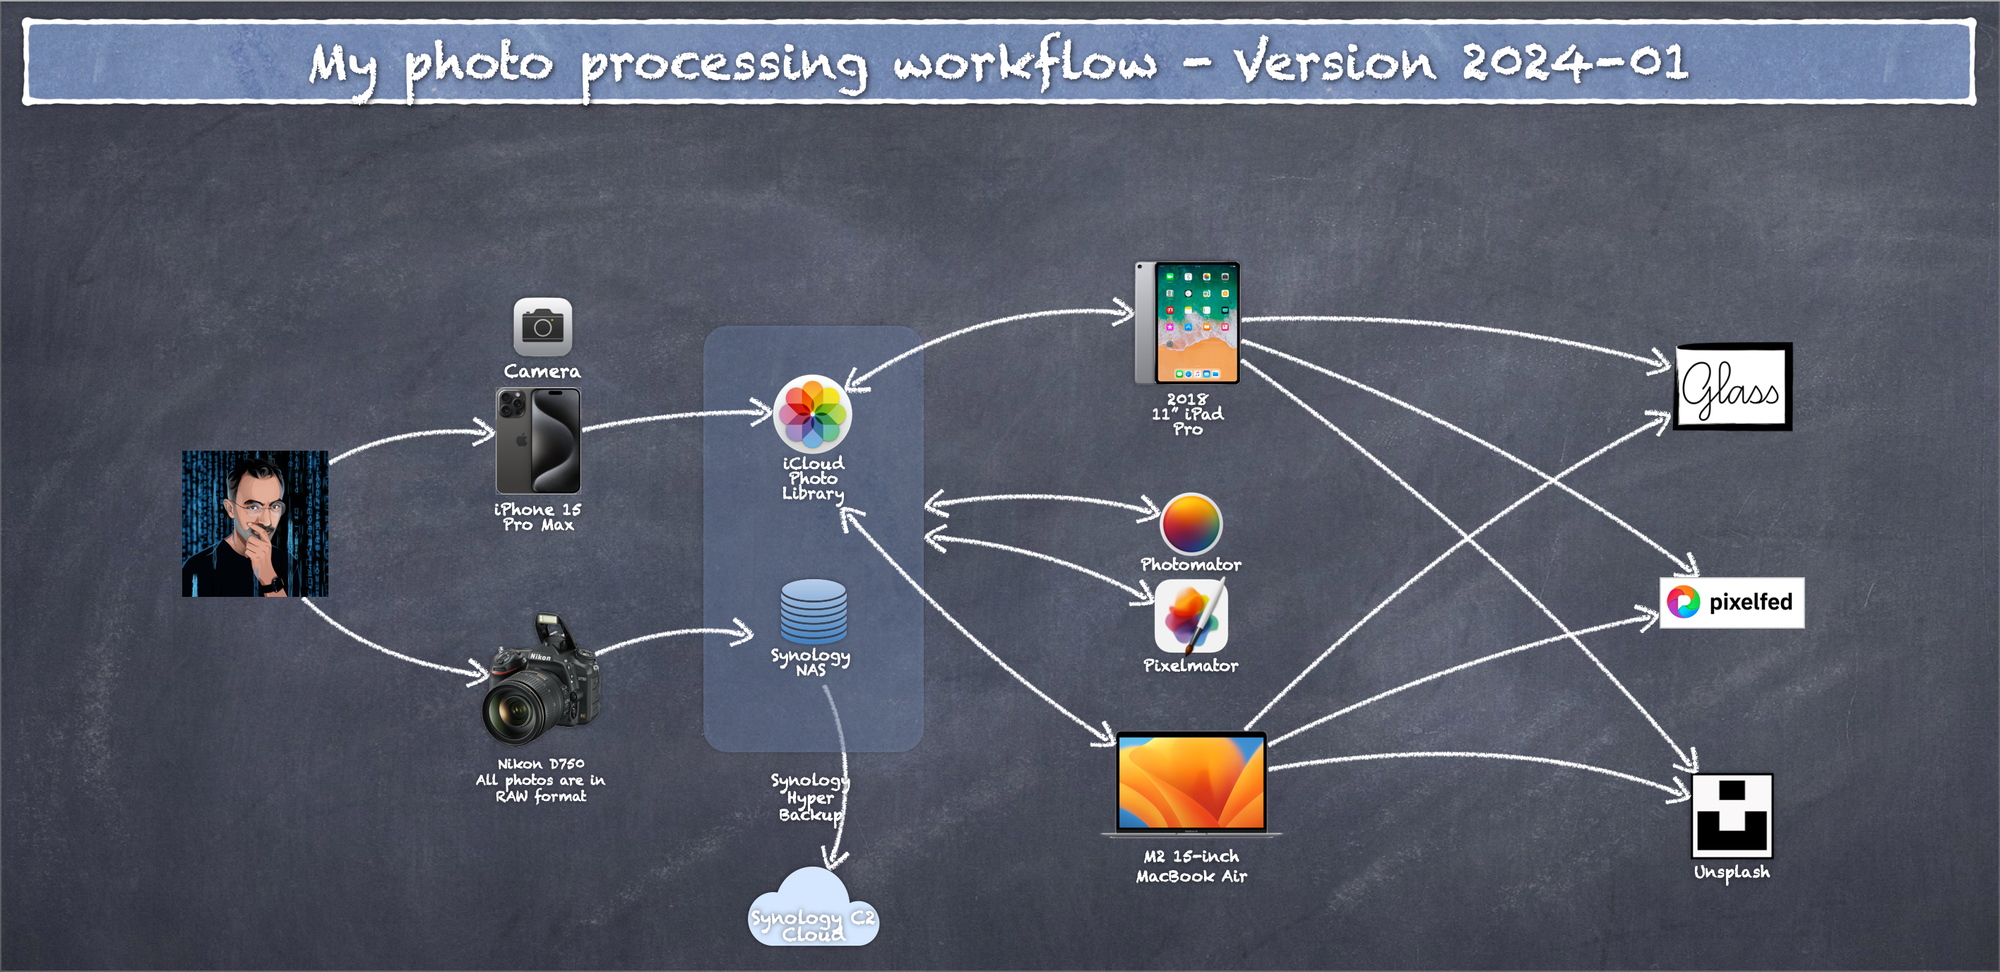 My latest photo processing workflow diagram for 2024-01.